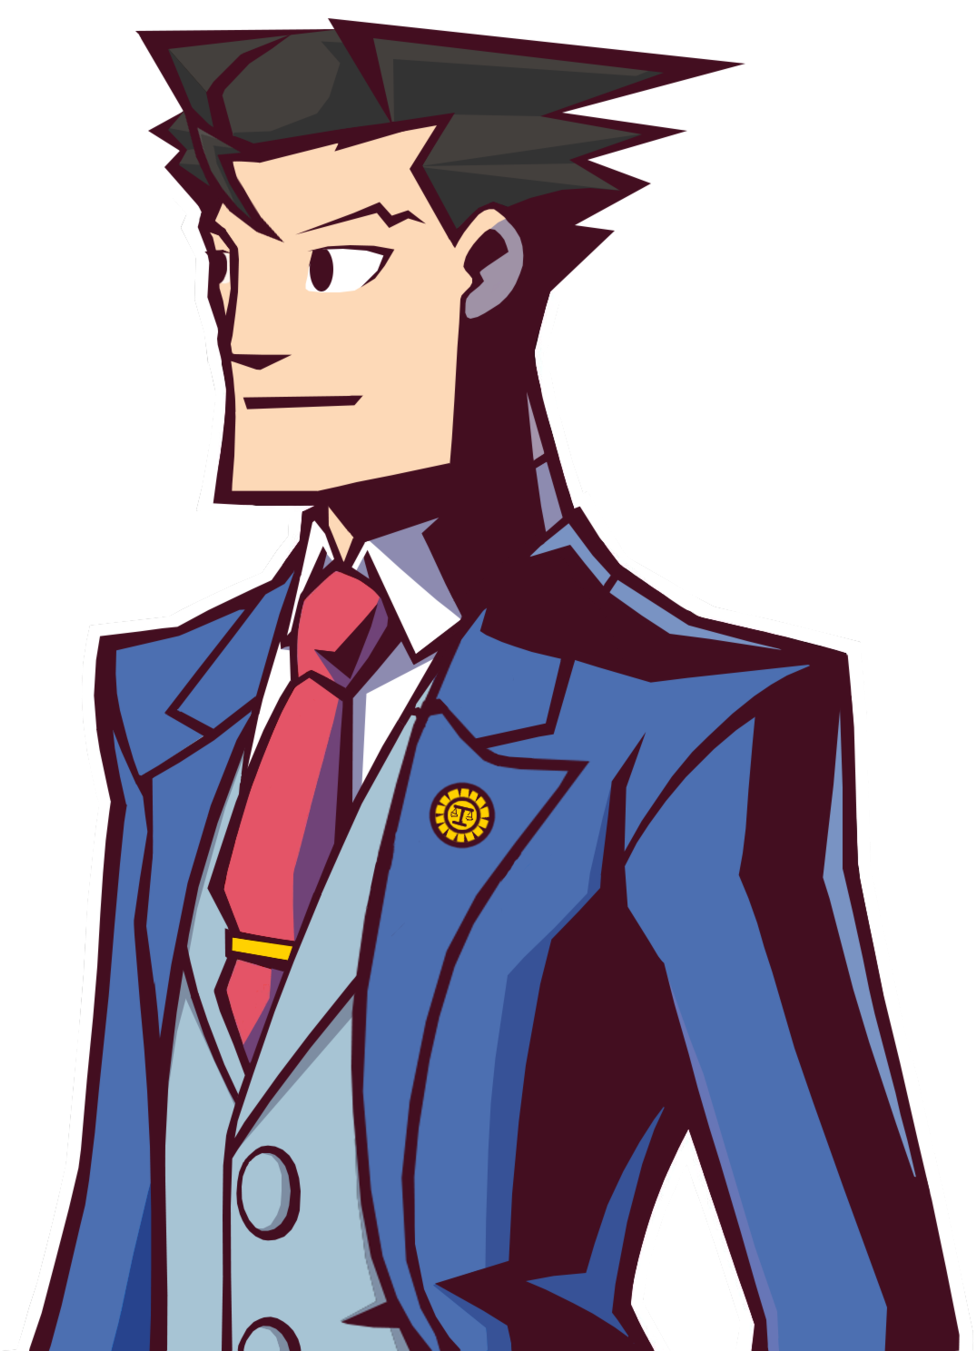 Ace Attorney Phoenix Wright - Ghost Trick Phantom Detektiv - Game Console - German (1024x1380), Png Download